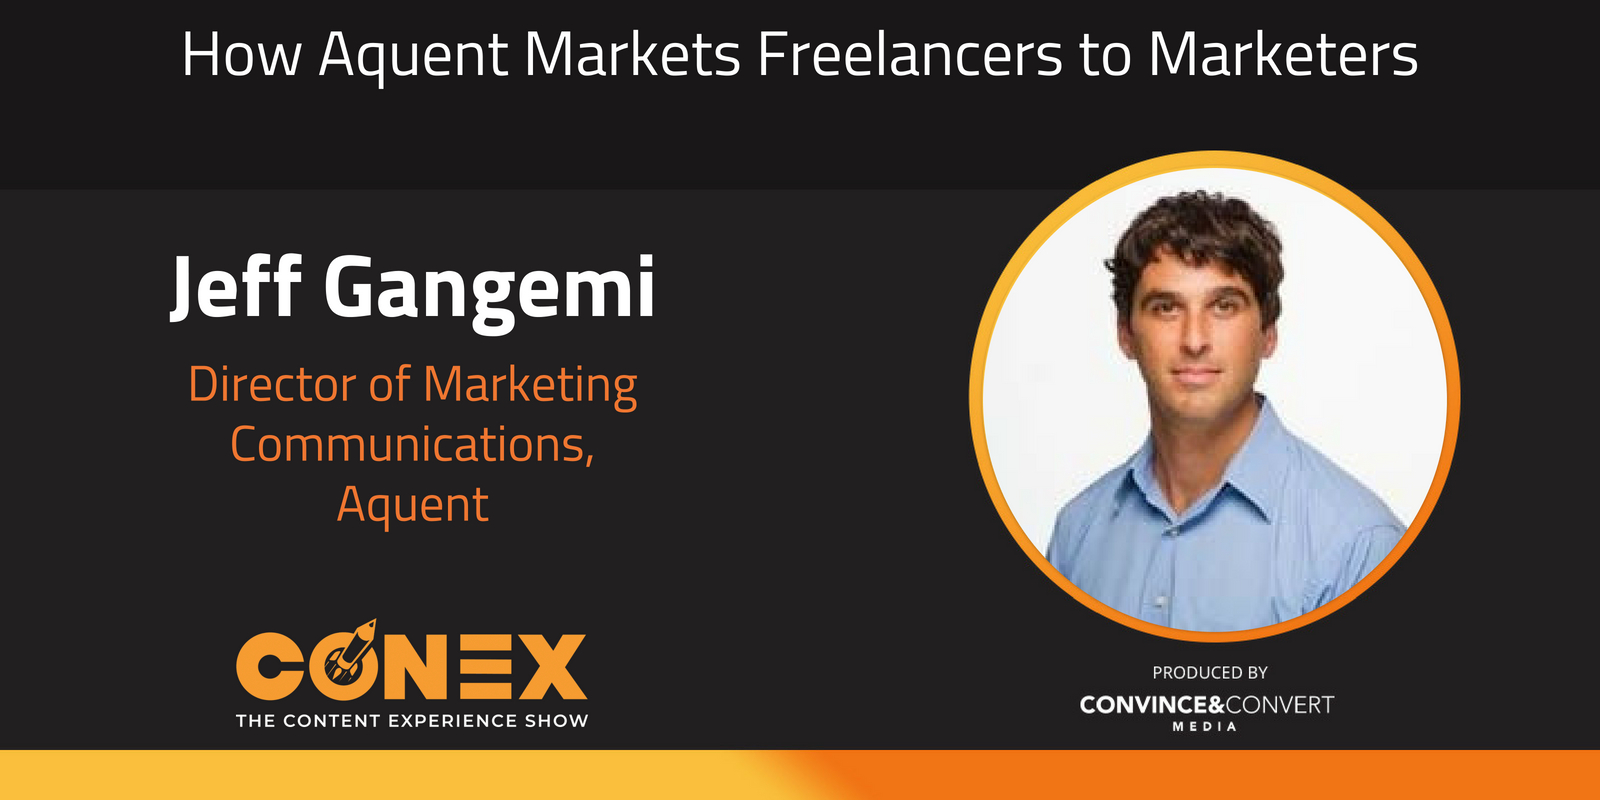 How Aquent Markets Freelancers to Marketers